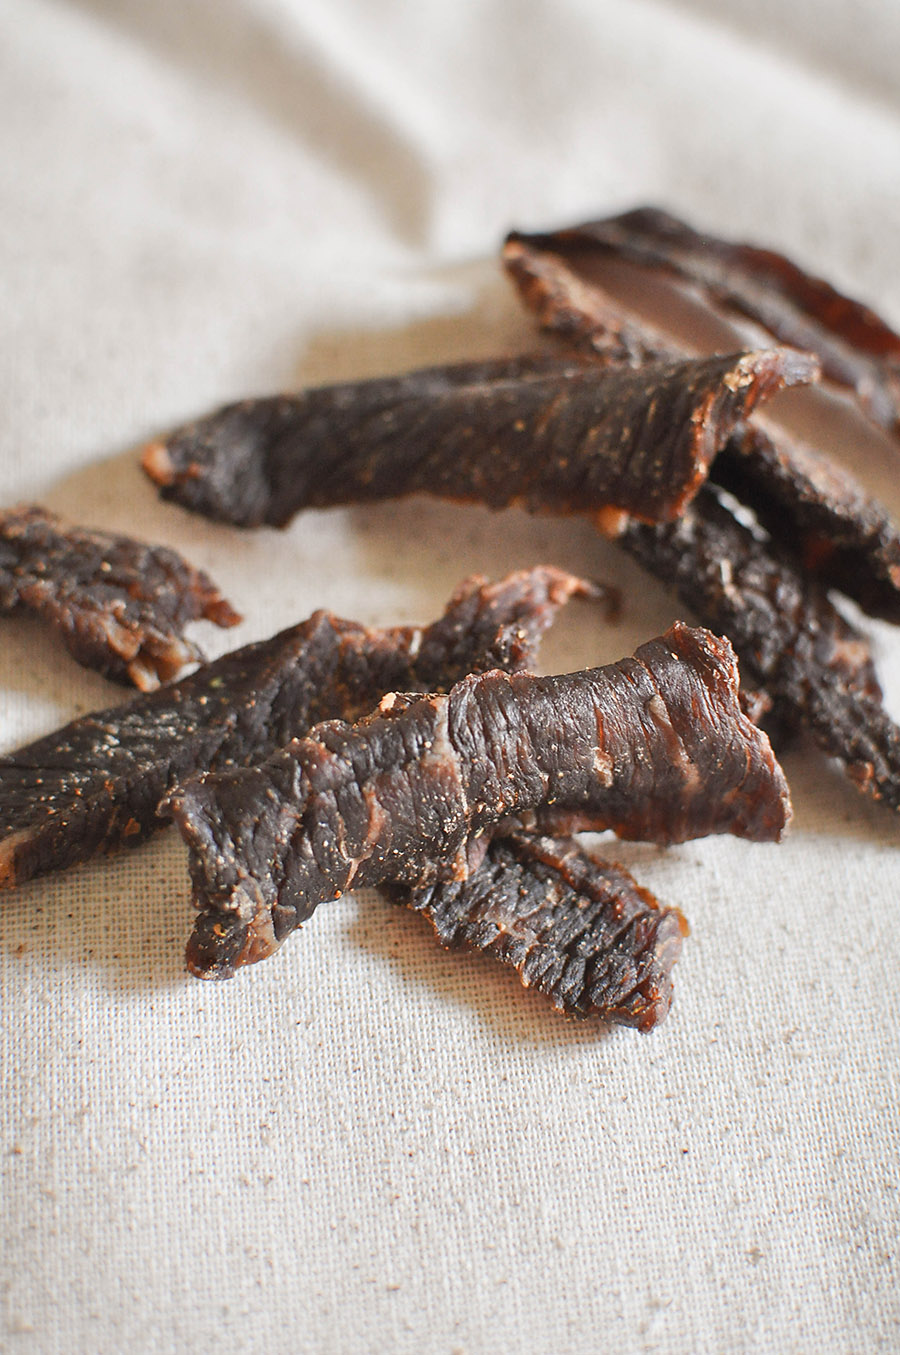 http://ourhandcraftedlife.com/wp-content/uploads/2017/06/Homemade-Beef-Jerky-Our-Handcrafted-Life-13.jpg